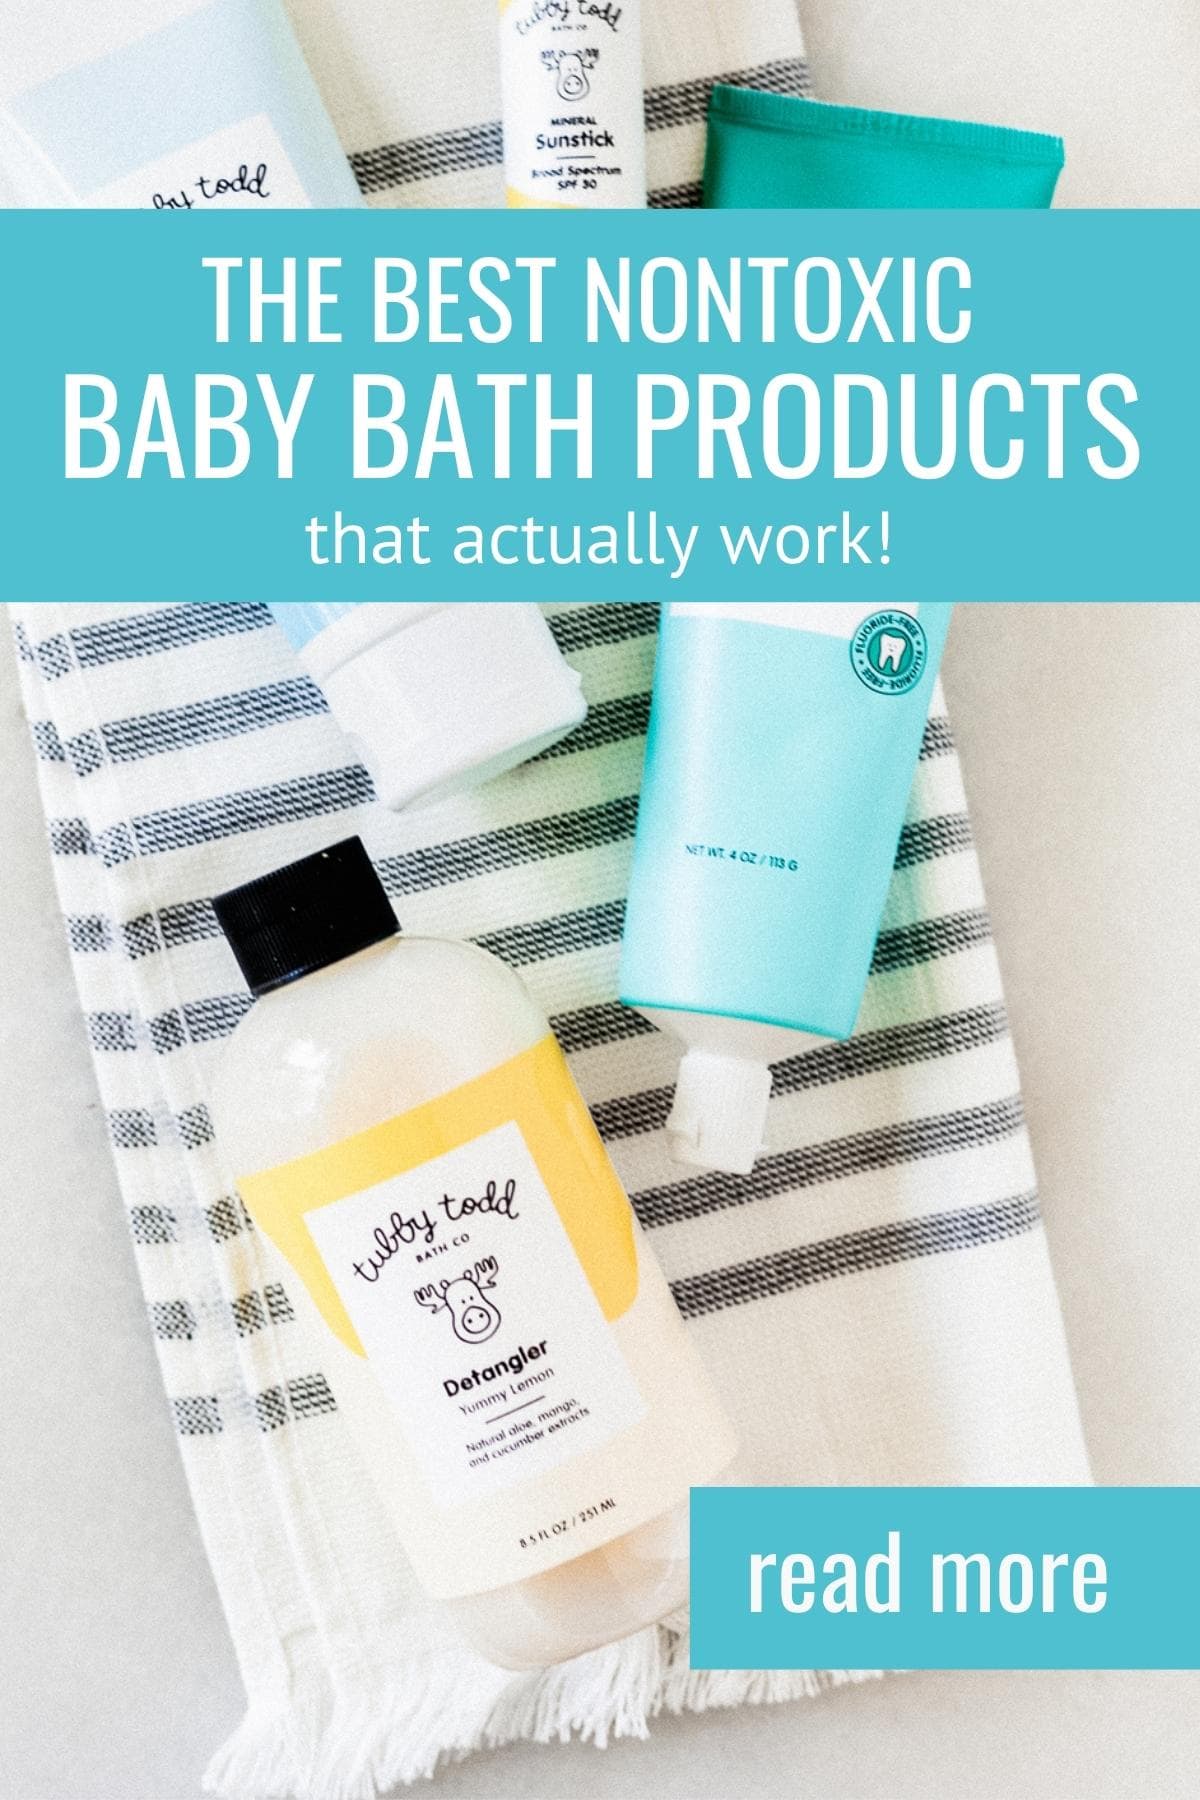 bottles of nontoxic baby bath products on a striped towel with text overlay.